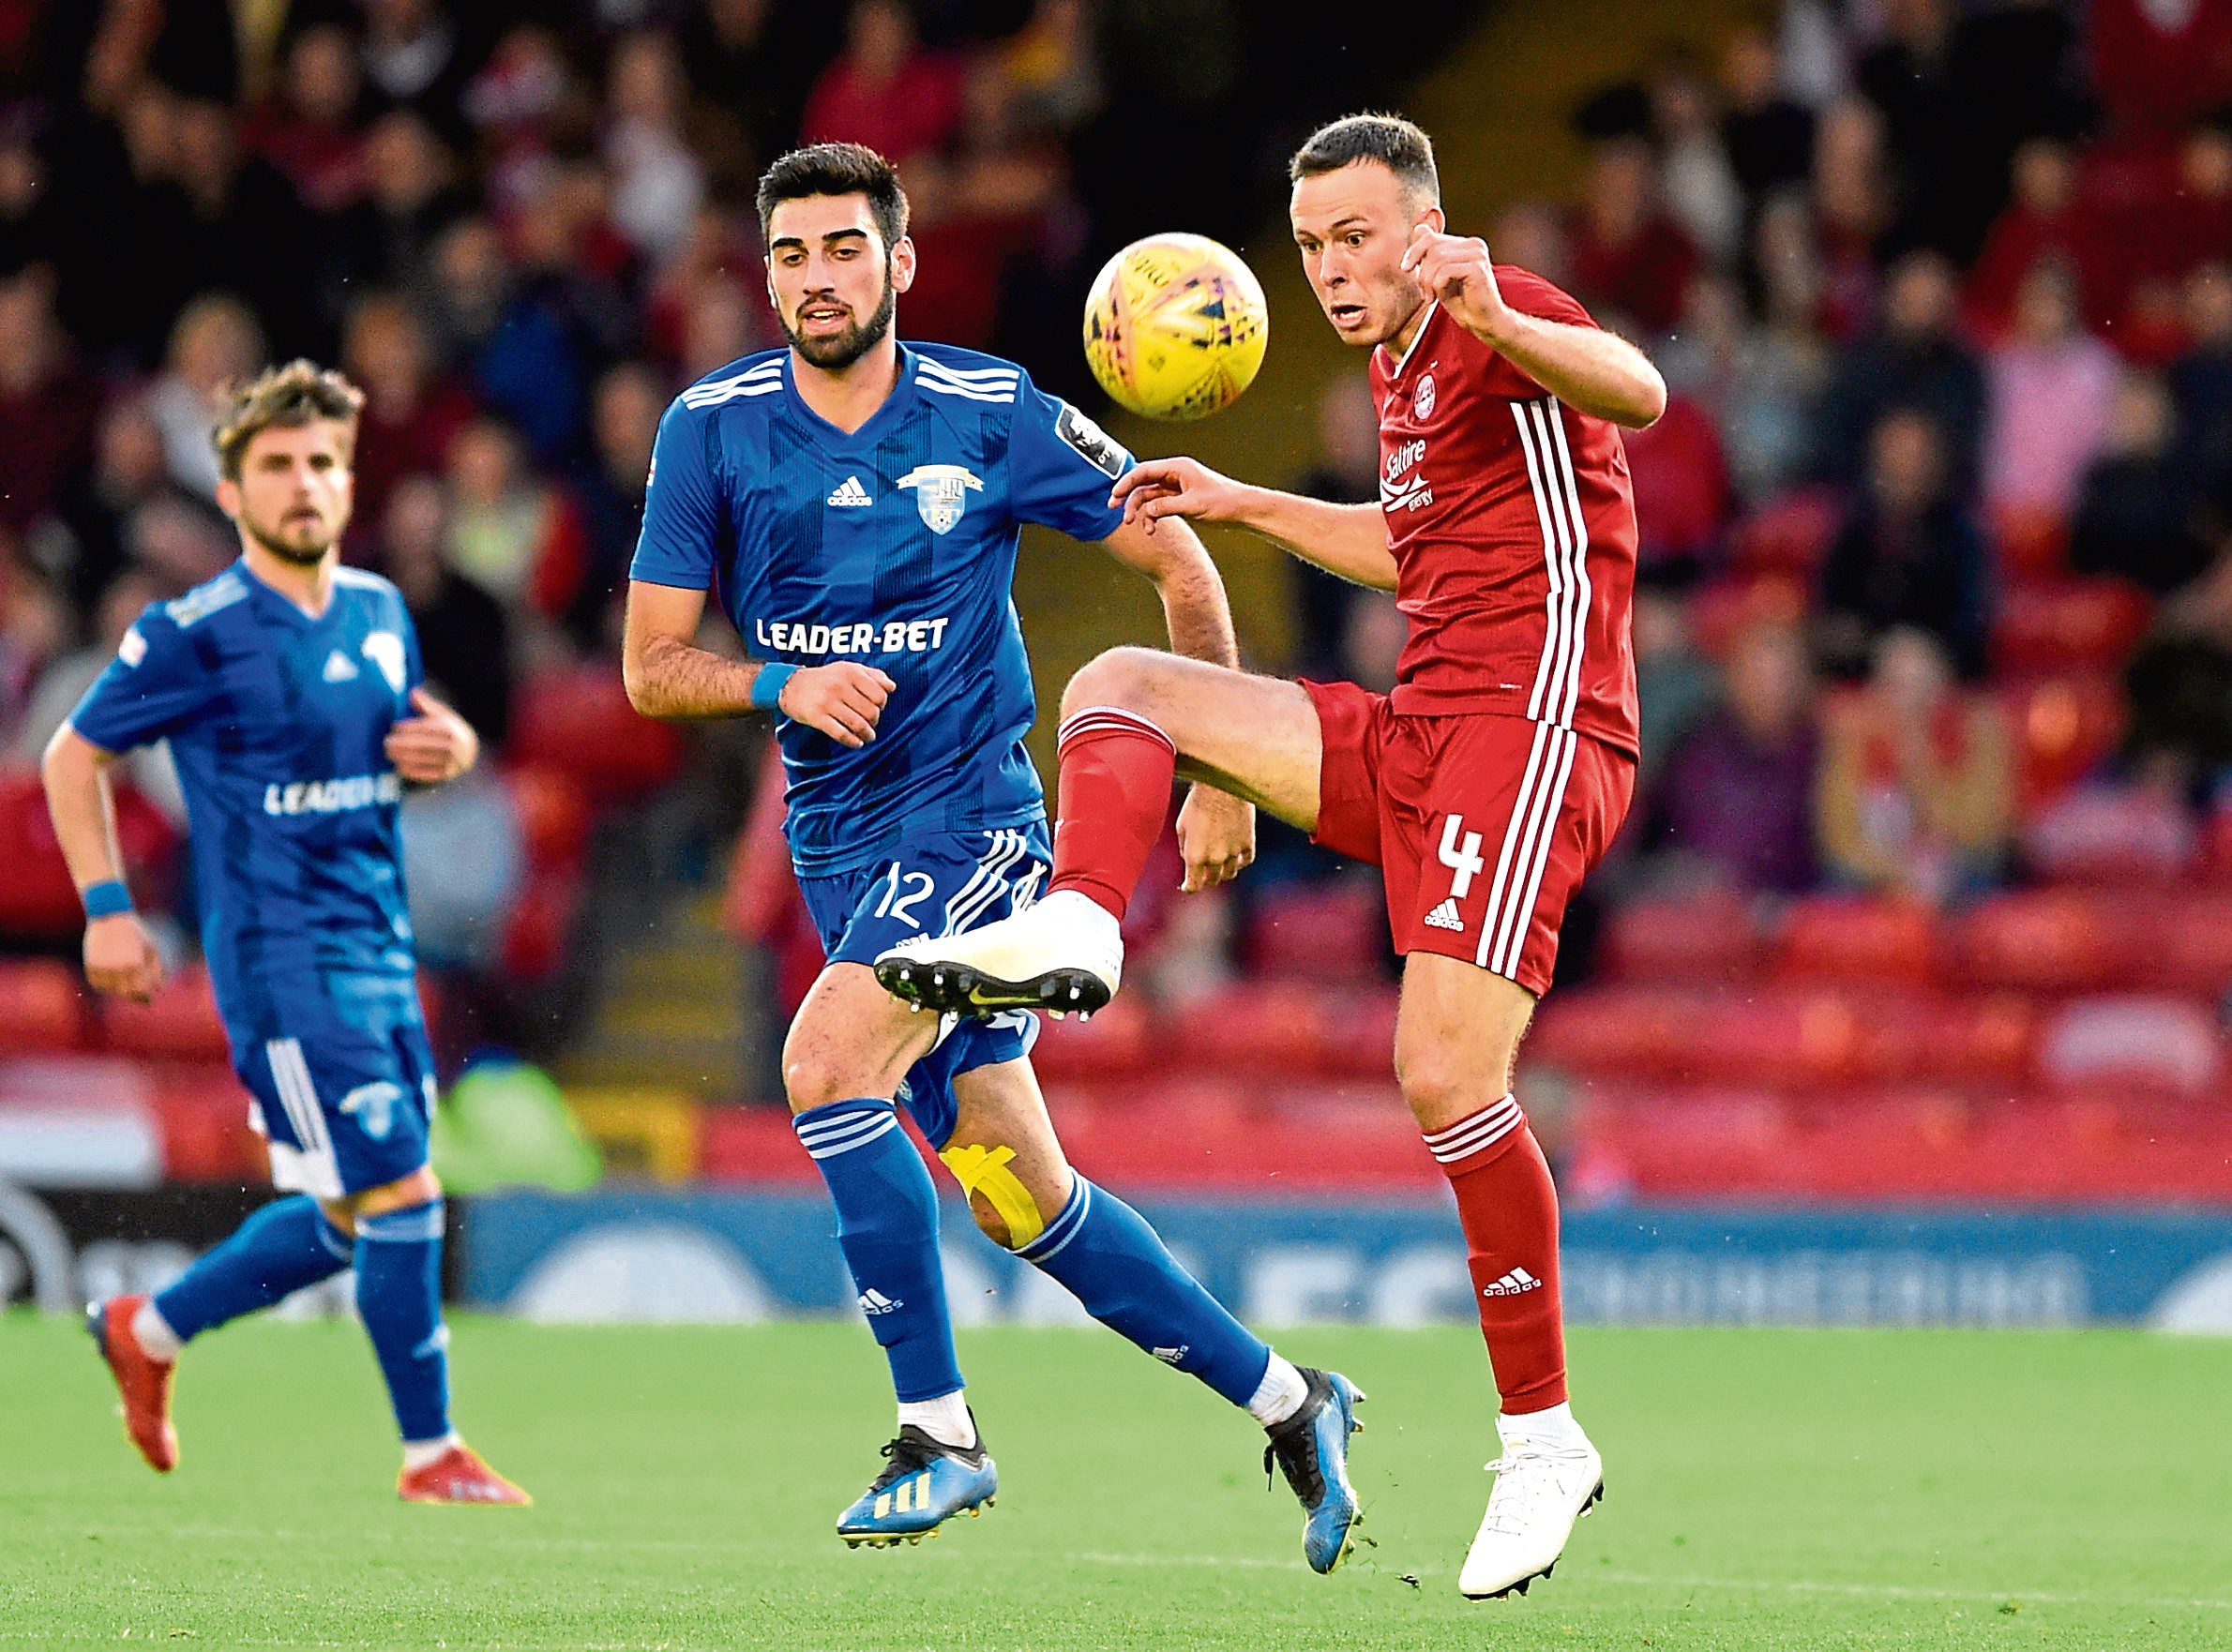 Reaching the group stages this year could create a fixture nightmare for Aberdeen.